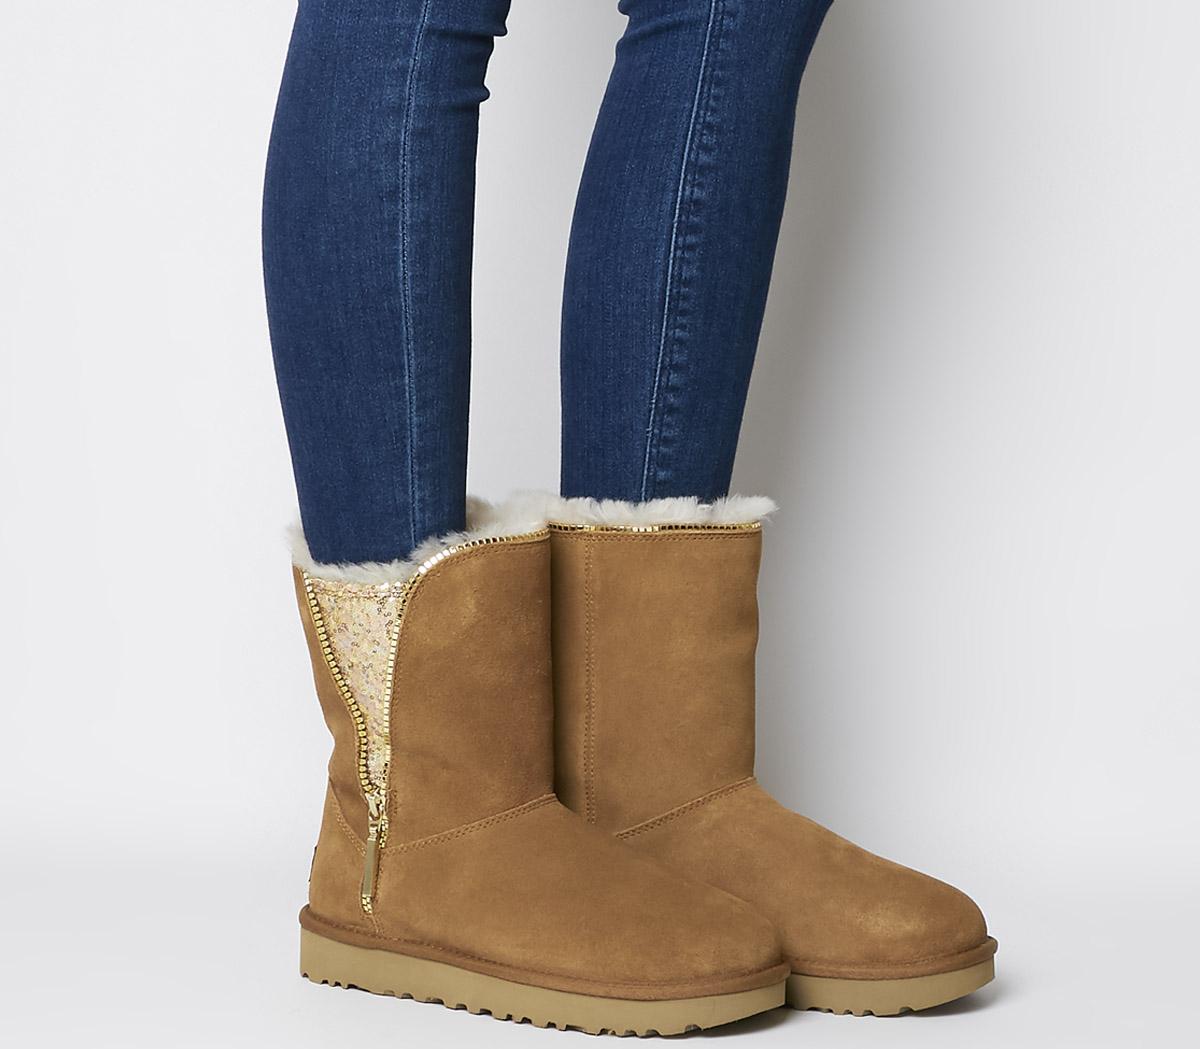 Uggs With Zipper Up The Back Online 